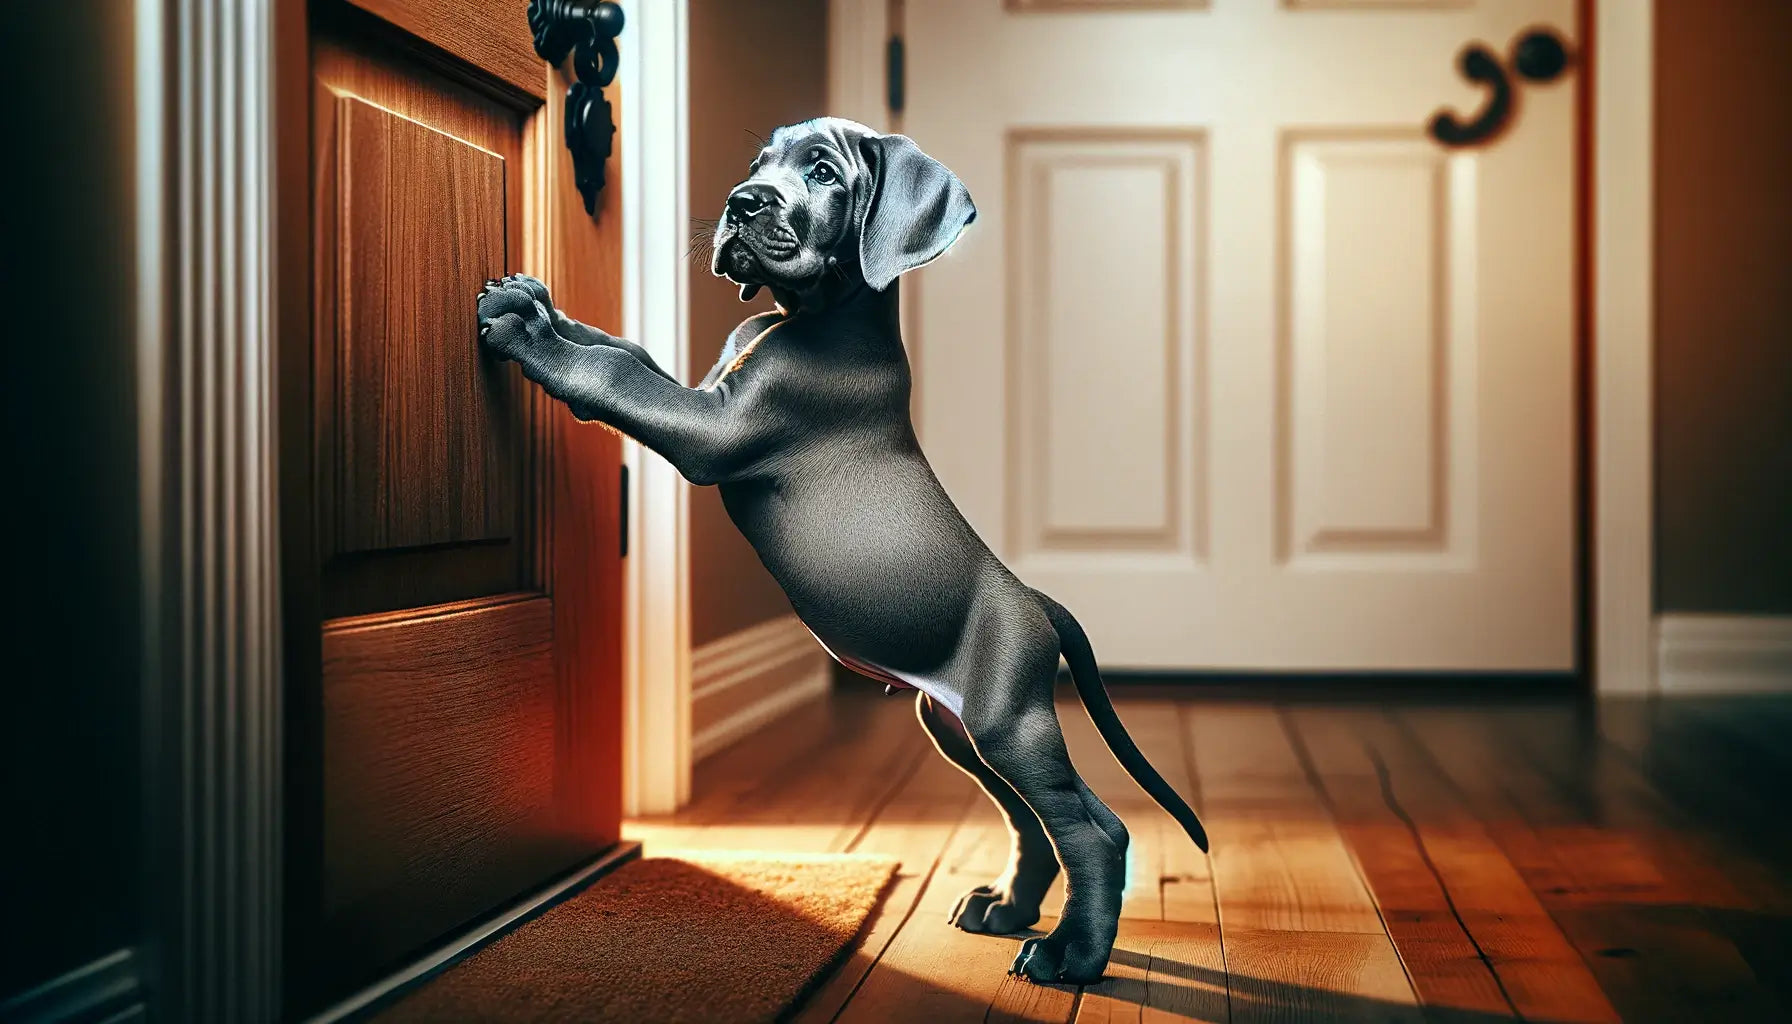 Blue Great Dane puppy confidently standing by a door, its compact size juxtaposed with the door's large features, ready for adventure.